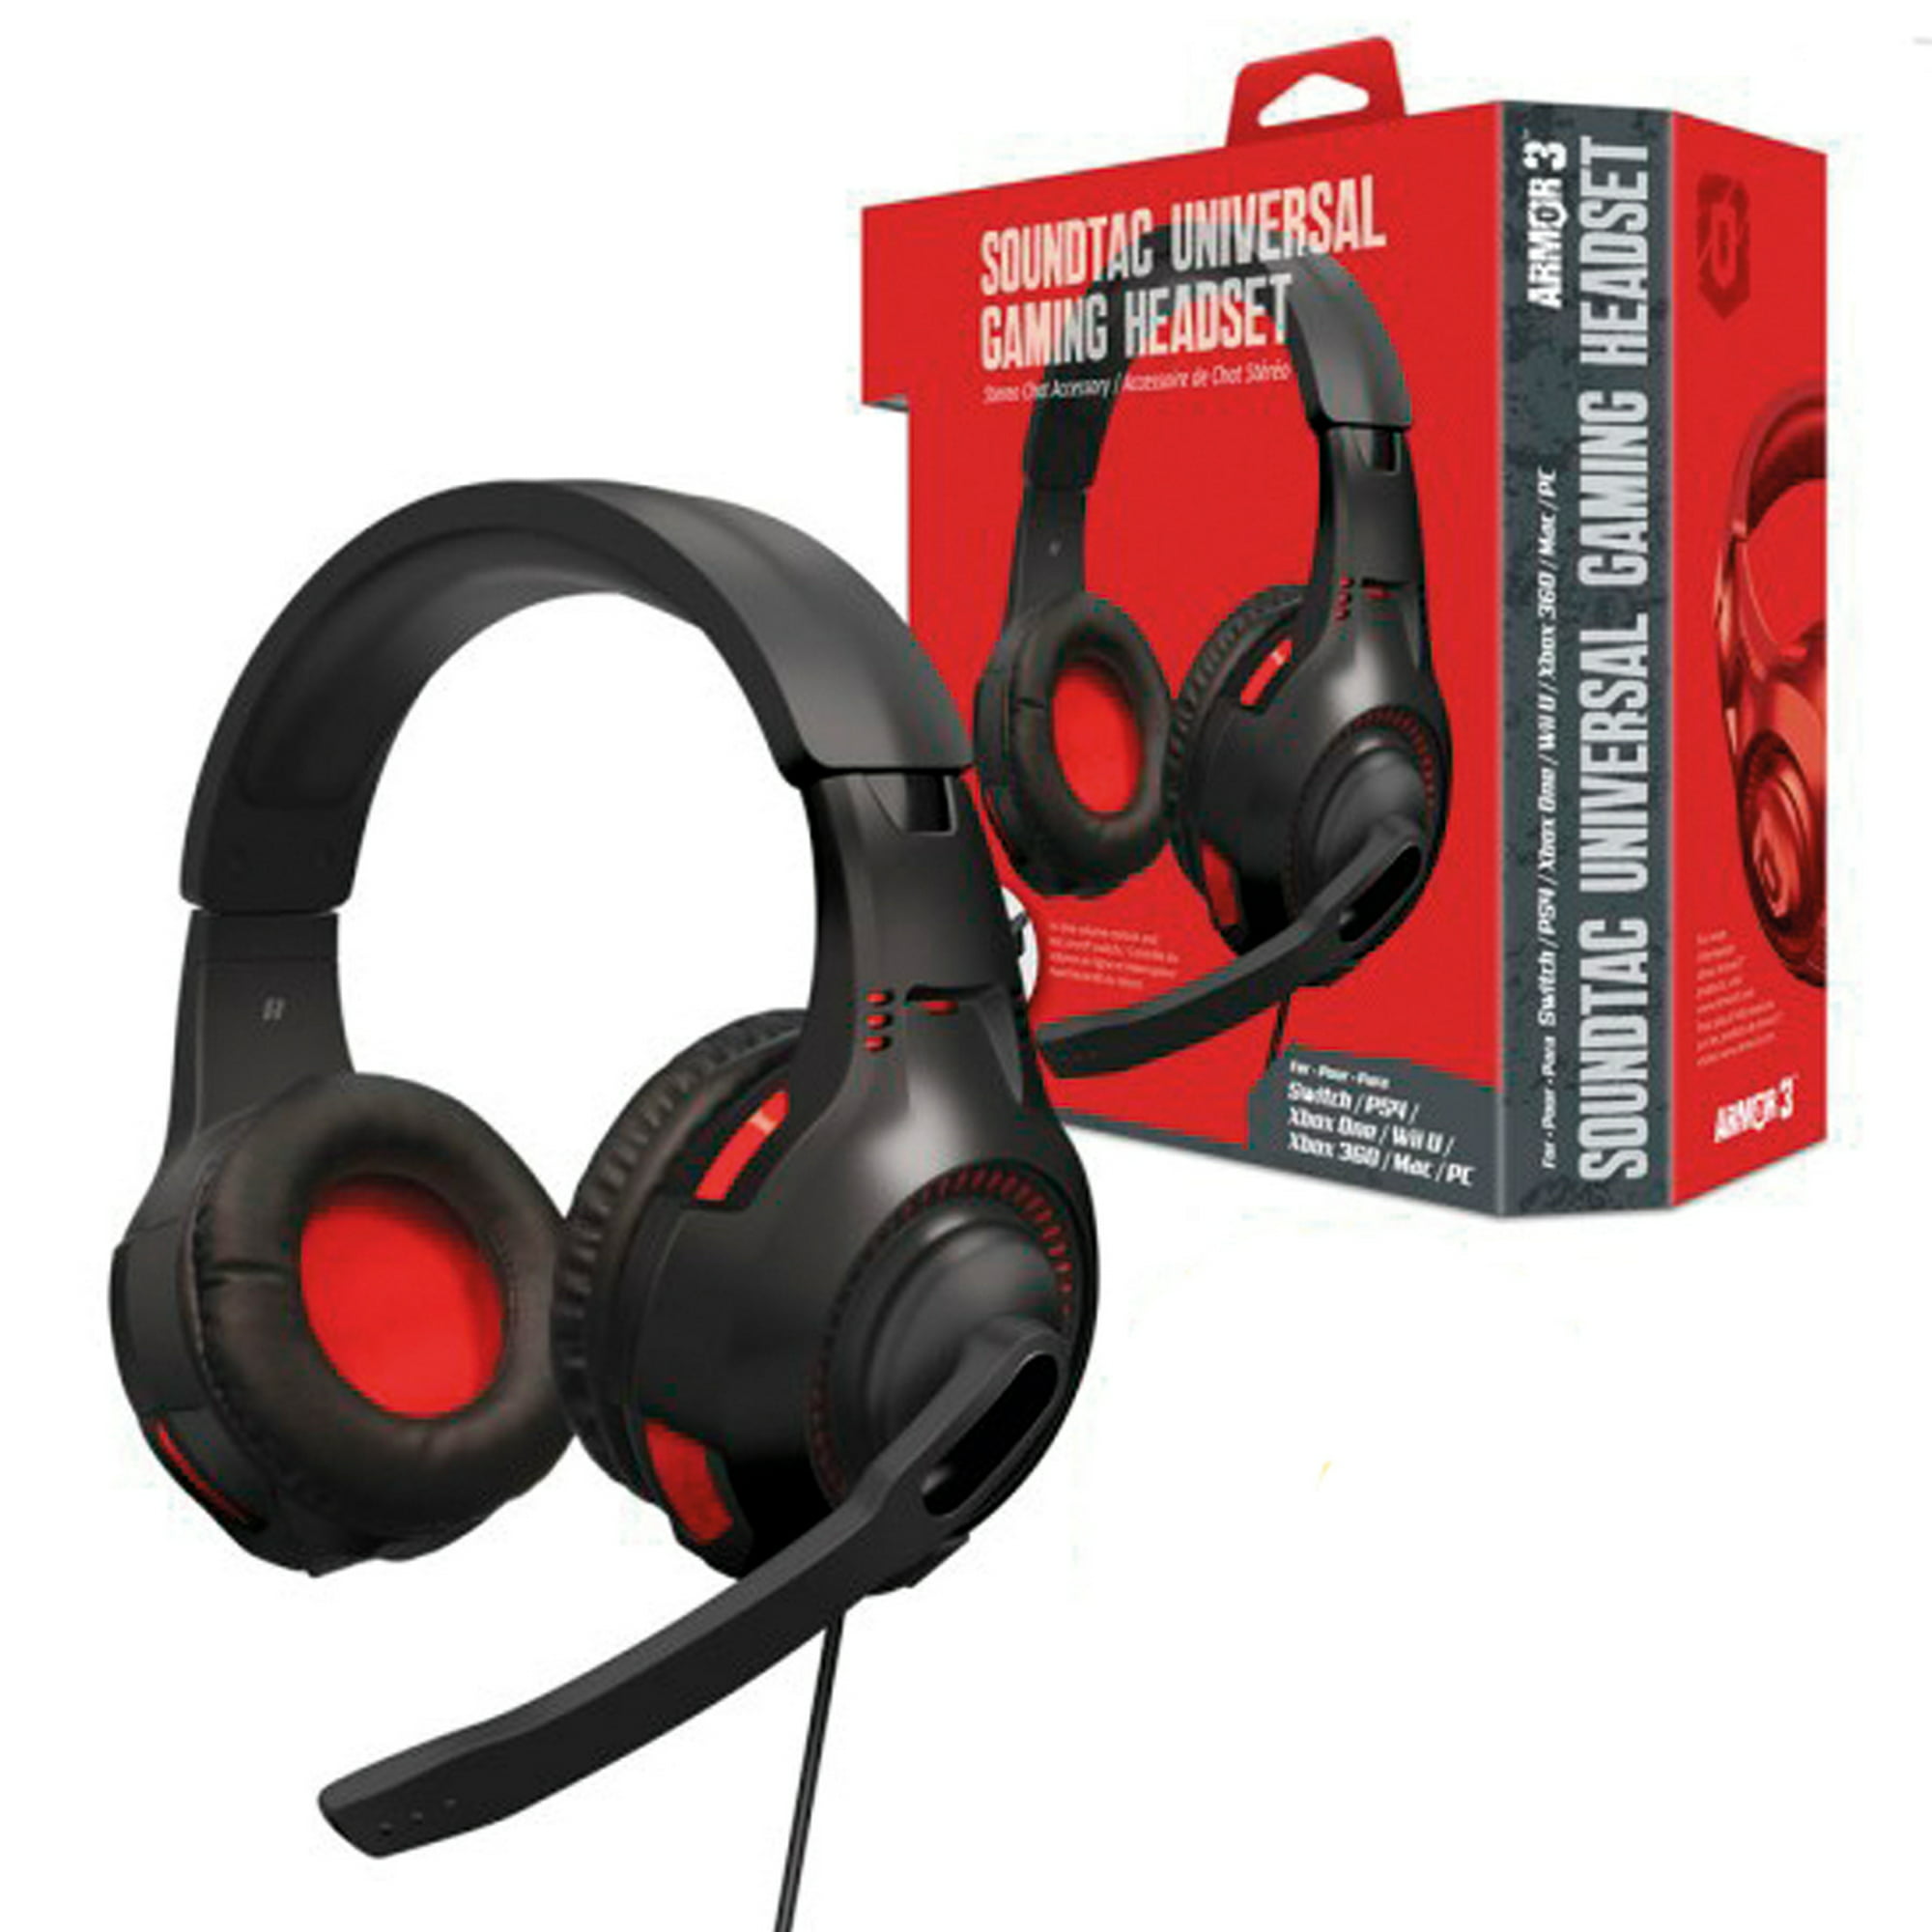 Cascos Gamer Auriculares Audifonos Gaming PS4 PC Xbox One 360